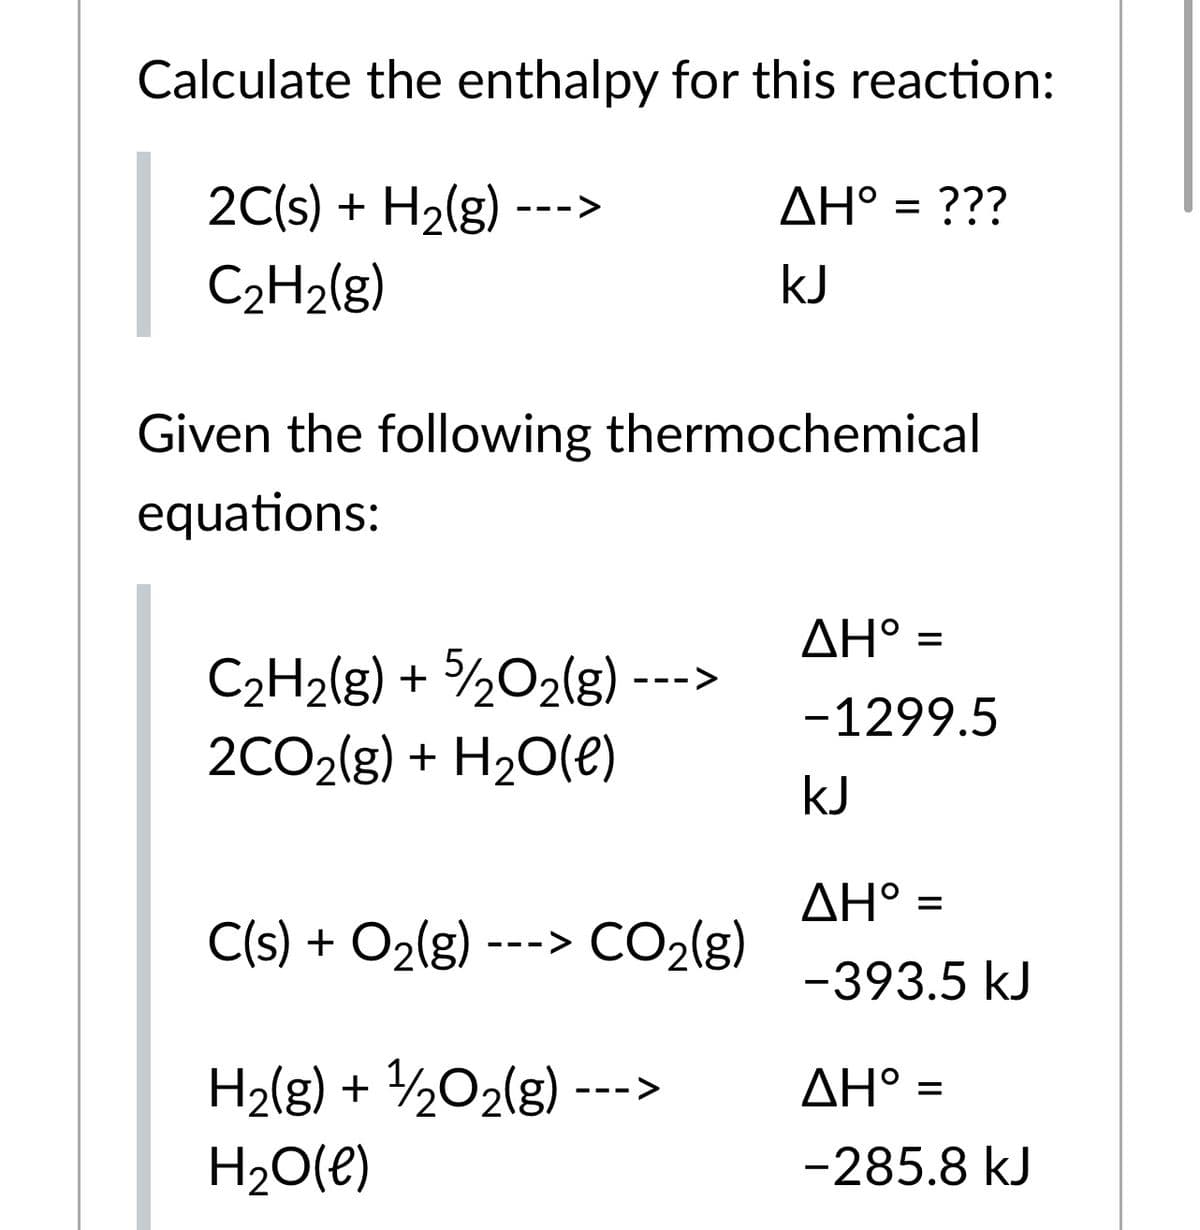 Calculate the enthalpy for this reaction:
2C(s) + H2(g) --->
AH° = ???
C2H2(g)
kJ
Given the following thermochemical
equations:
ΔΗ'
%D
C2H2[g) + ½O2{g)-
2CO2(g) + H20(e)
- --
-1299.5
kJ
ΔΗ-
%D
C(s) + O2(g) ---> CO2(g)
-393.5 kJ
H2(g) + ½O2(g) --->
ΔΗ :
H20(e)
-285.8 kJ
